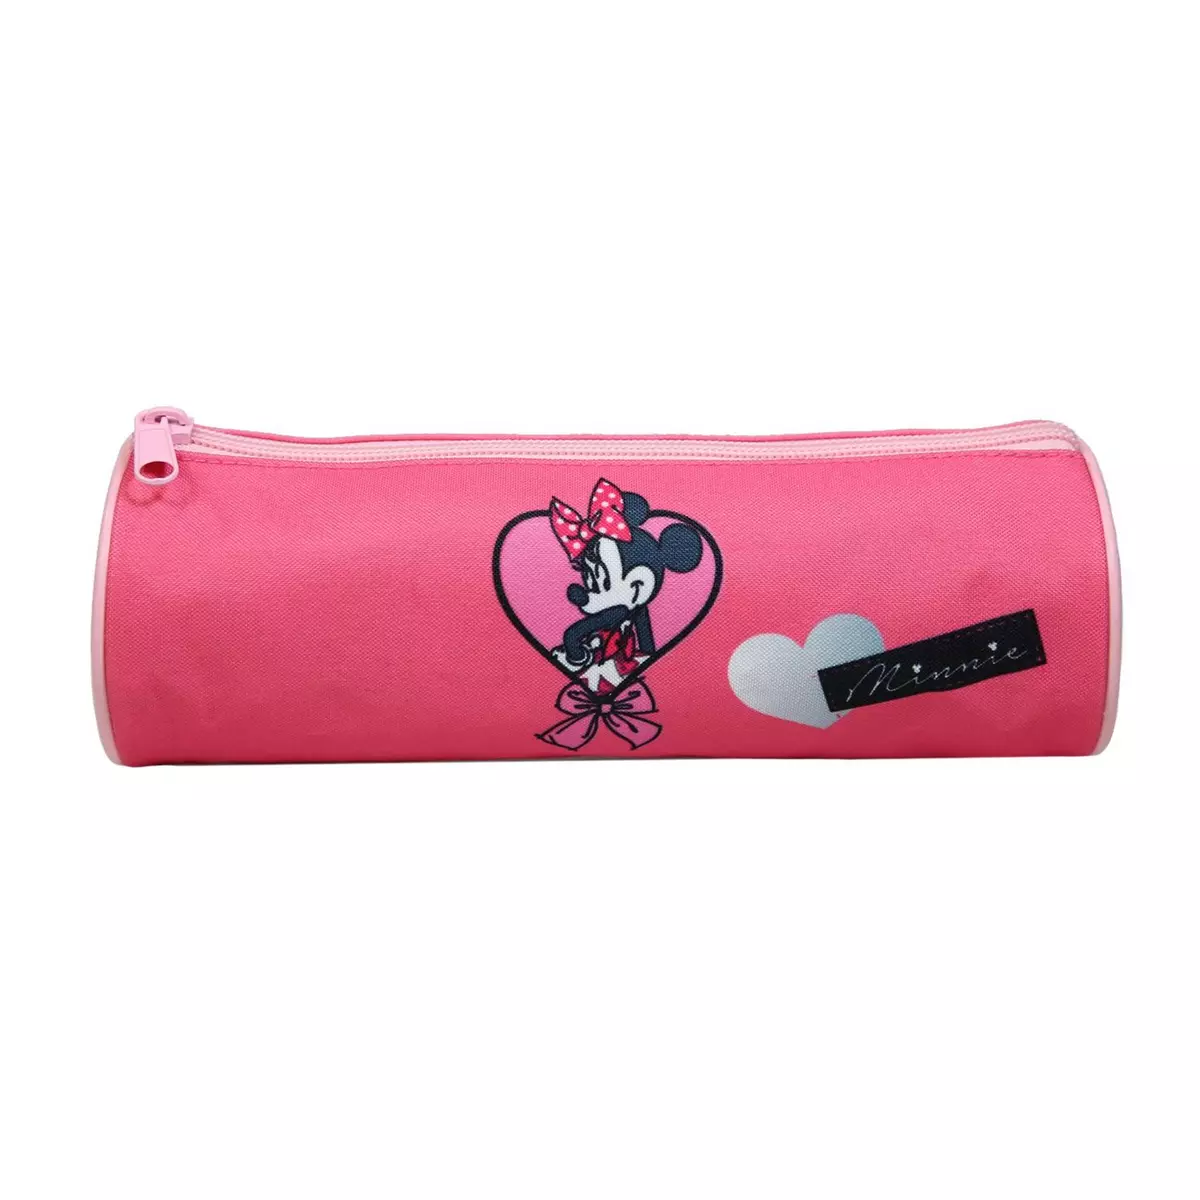 Bagtrotter BAGTROTTER Trousse scolaire ronde Minnie Rose Noeud